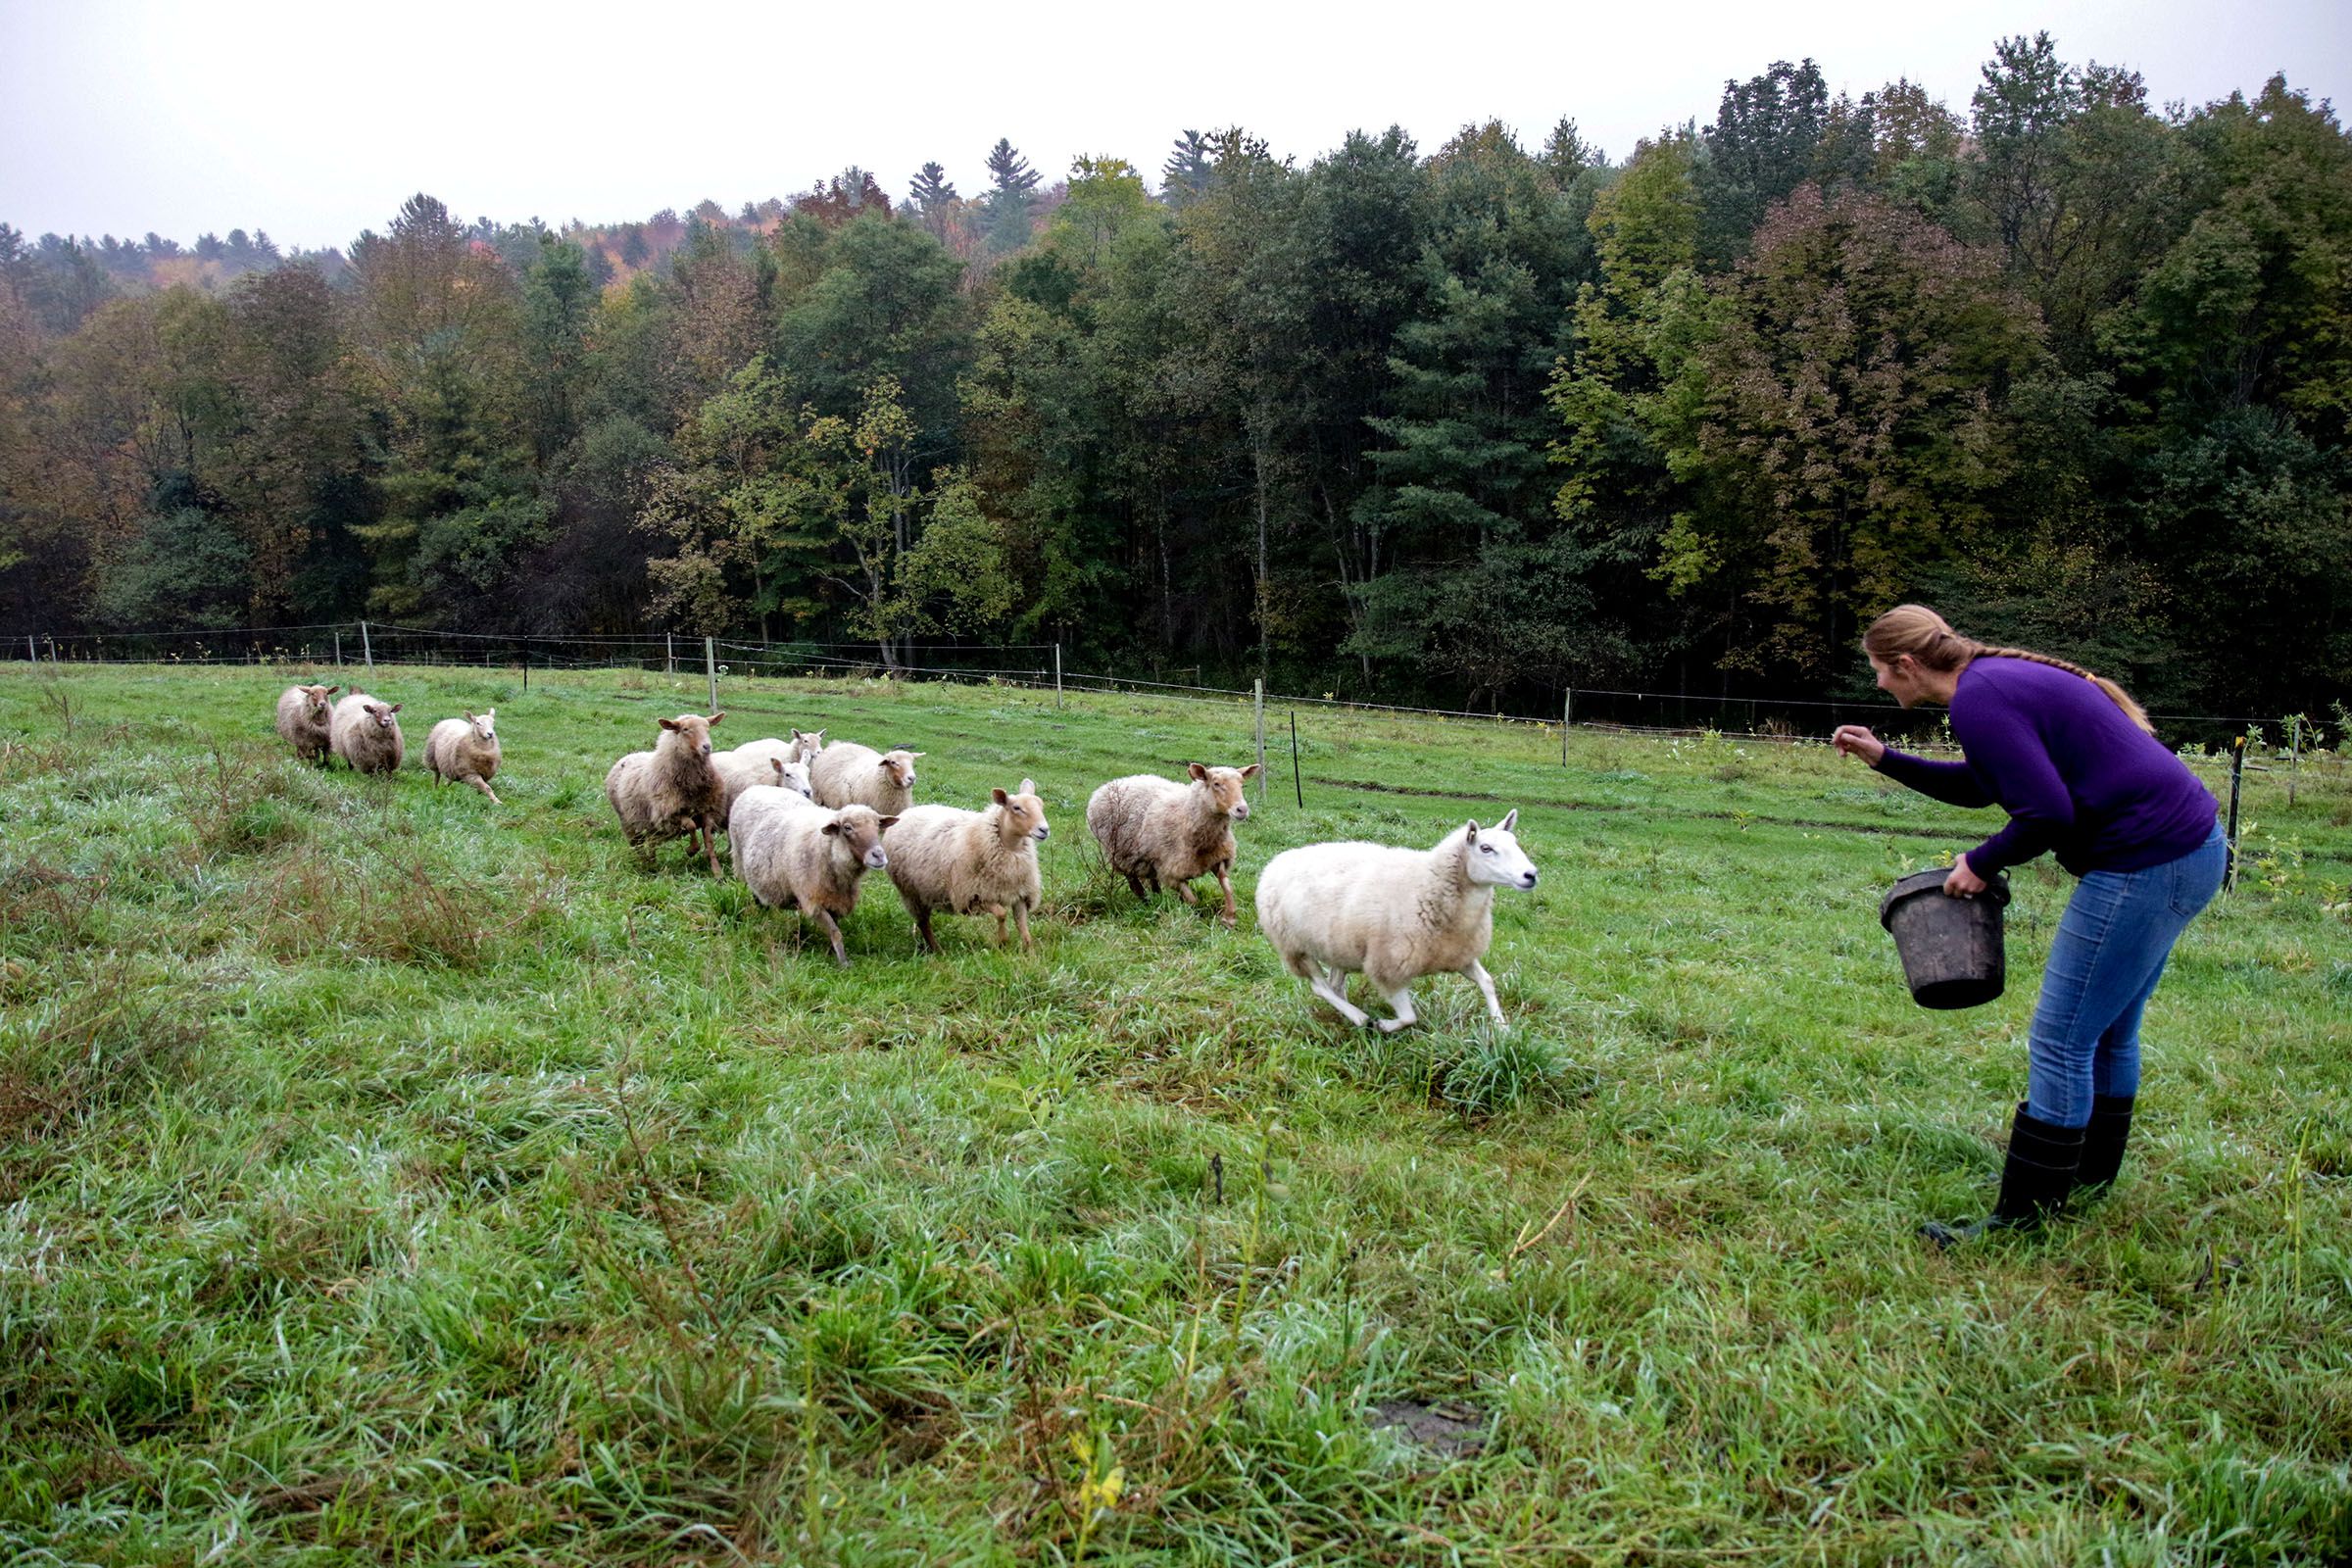 The sheep of Many Summers Farm come running as Heather Gallagher arrives with their feed during her morning chores in Cornish, N.H., on Monday, Oct. 8, 2018. (Valley News - August Frank) Copyright Valley News. May not be reprinted or used online without permission. Send requests to permission@vnews.com.